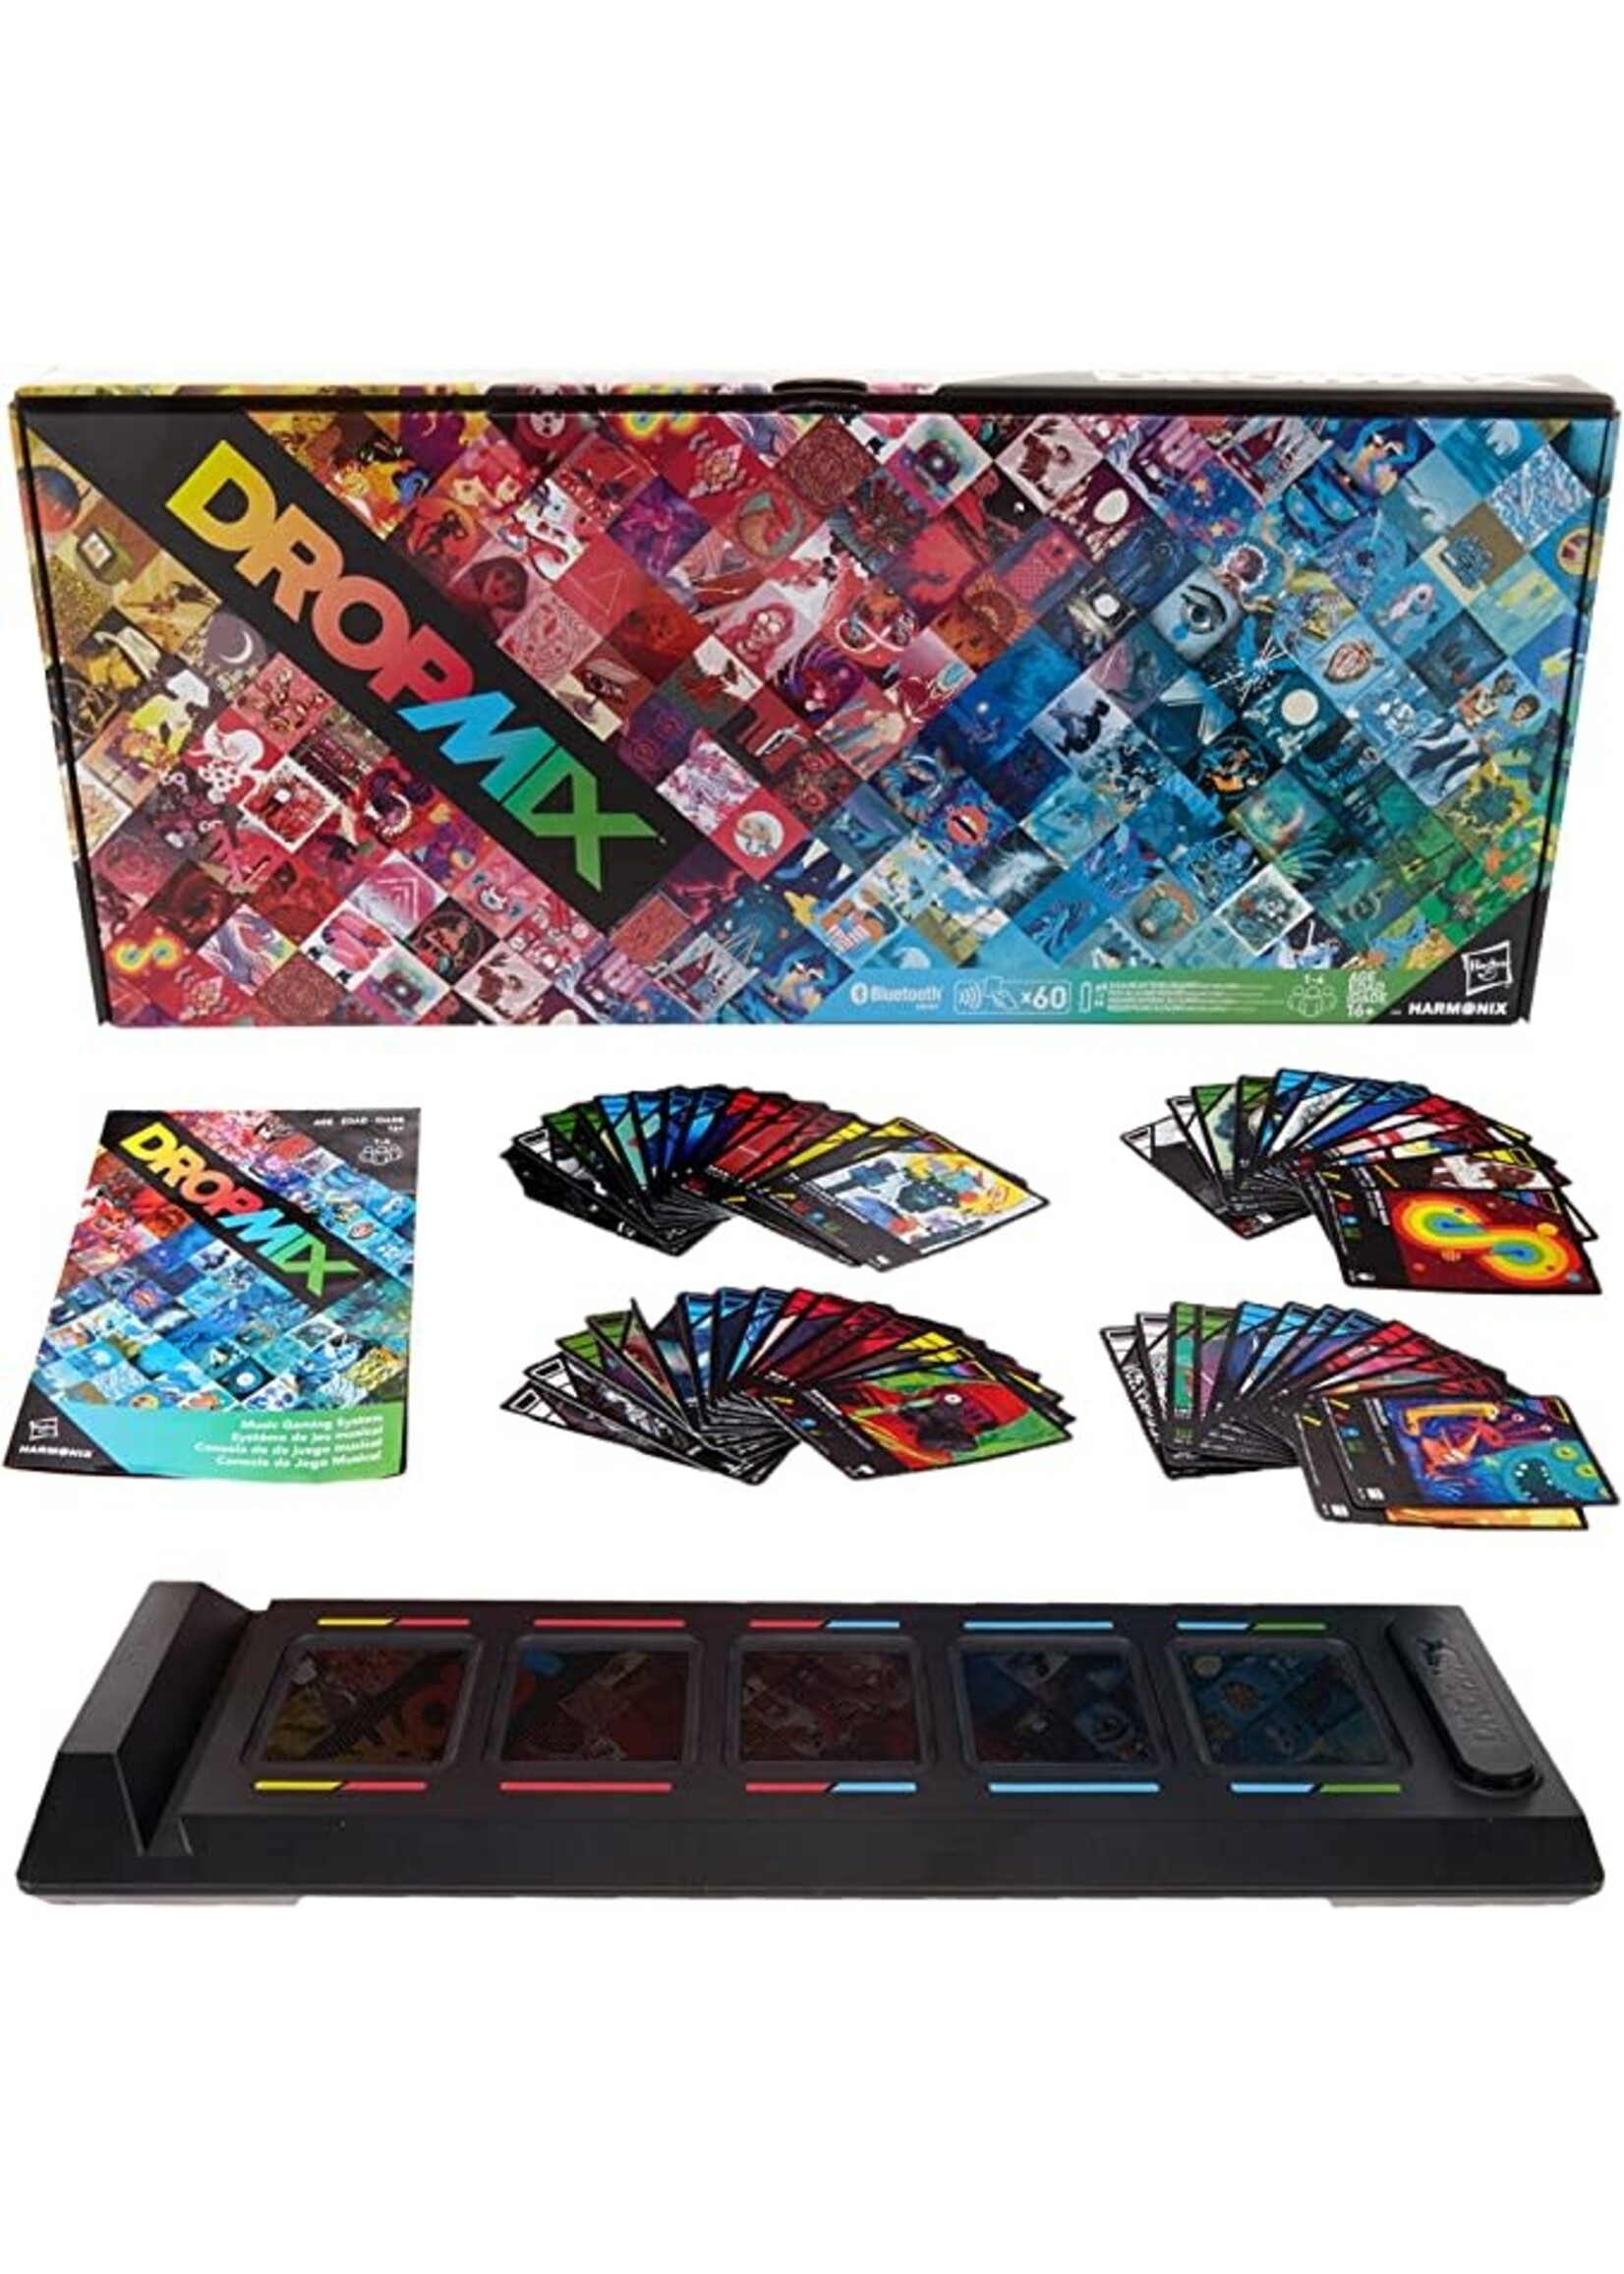 Hasbro DropMix Music Gaming System, Brown, 4 Players